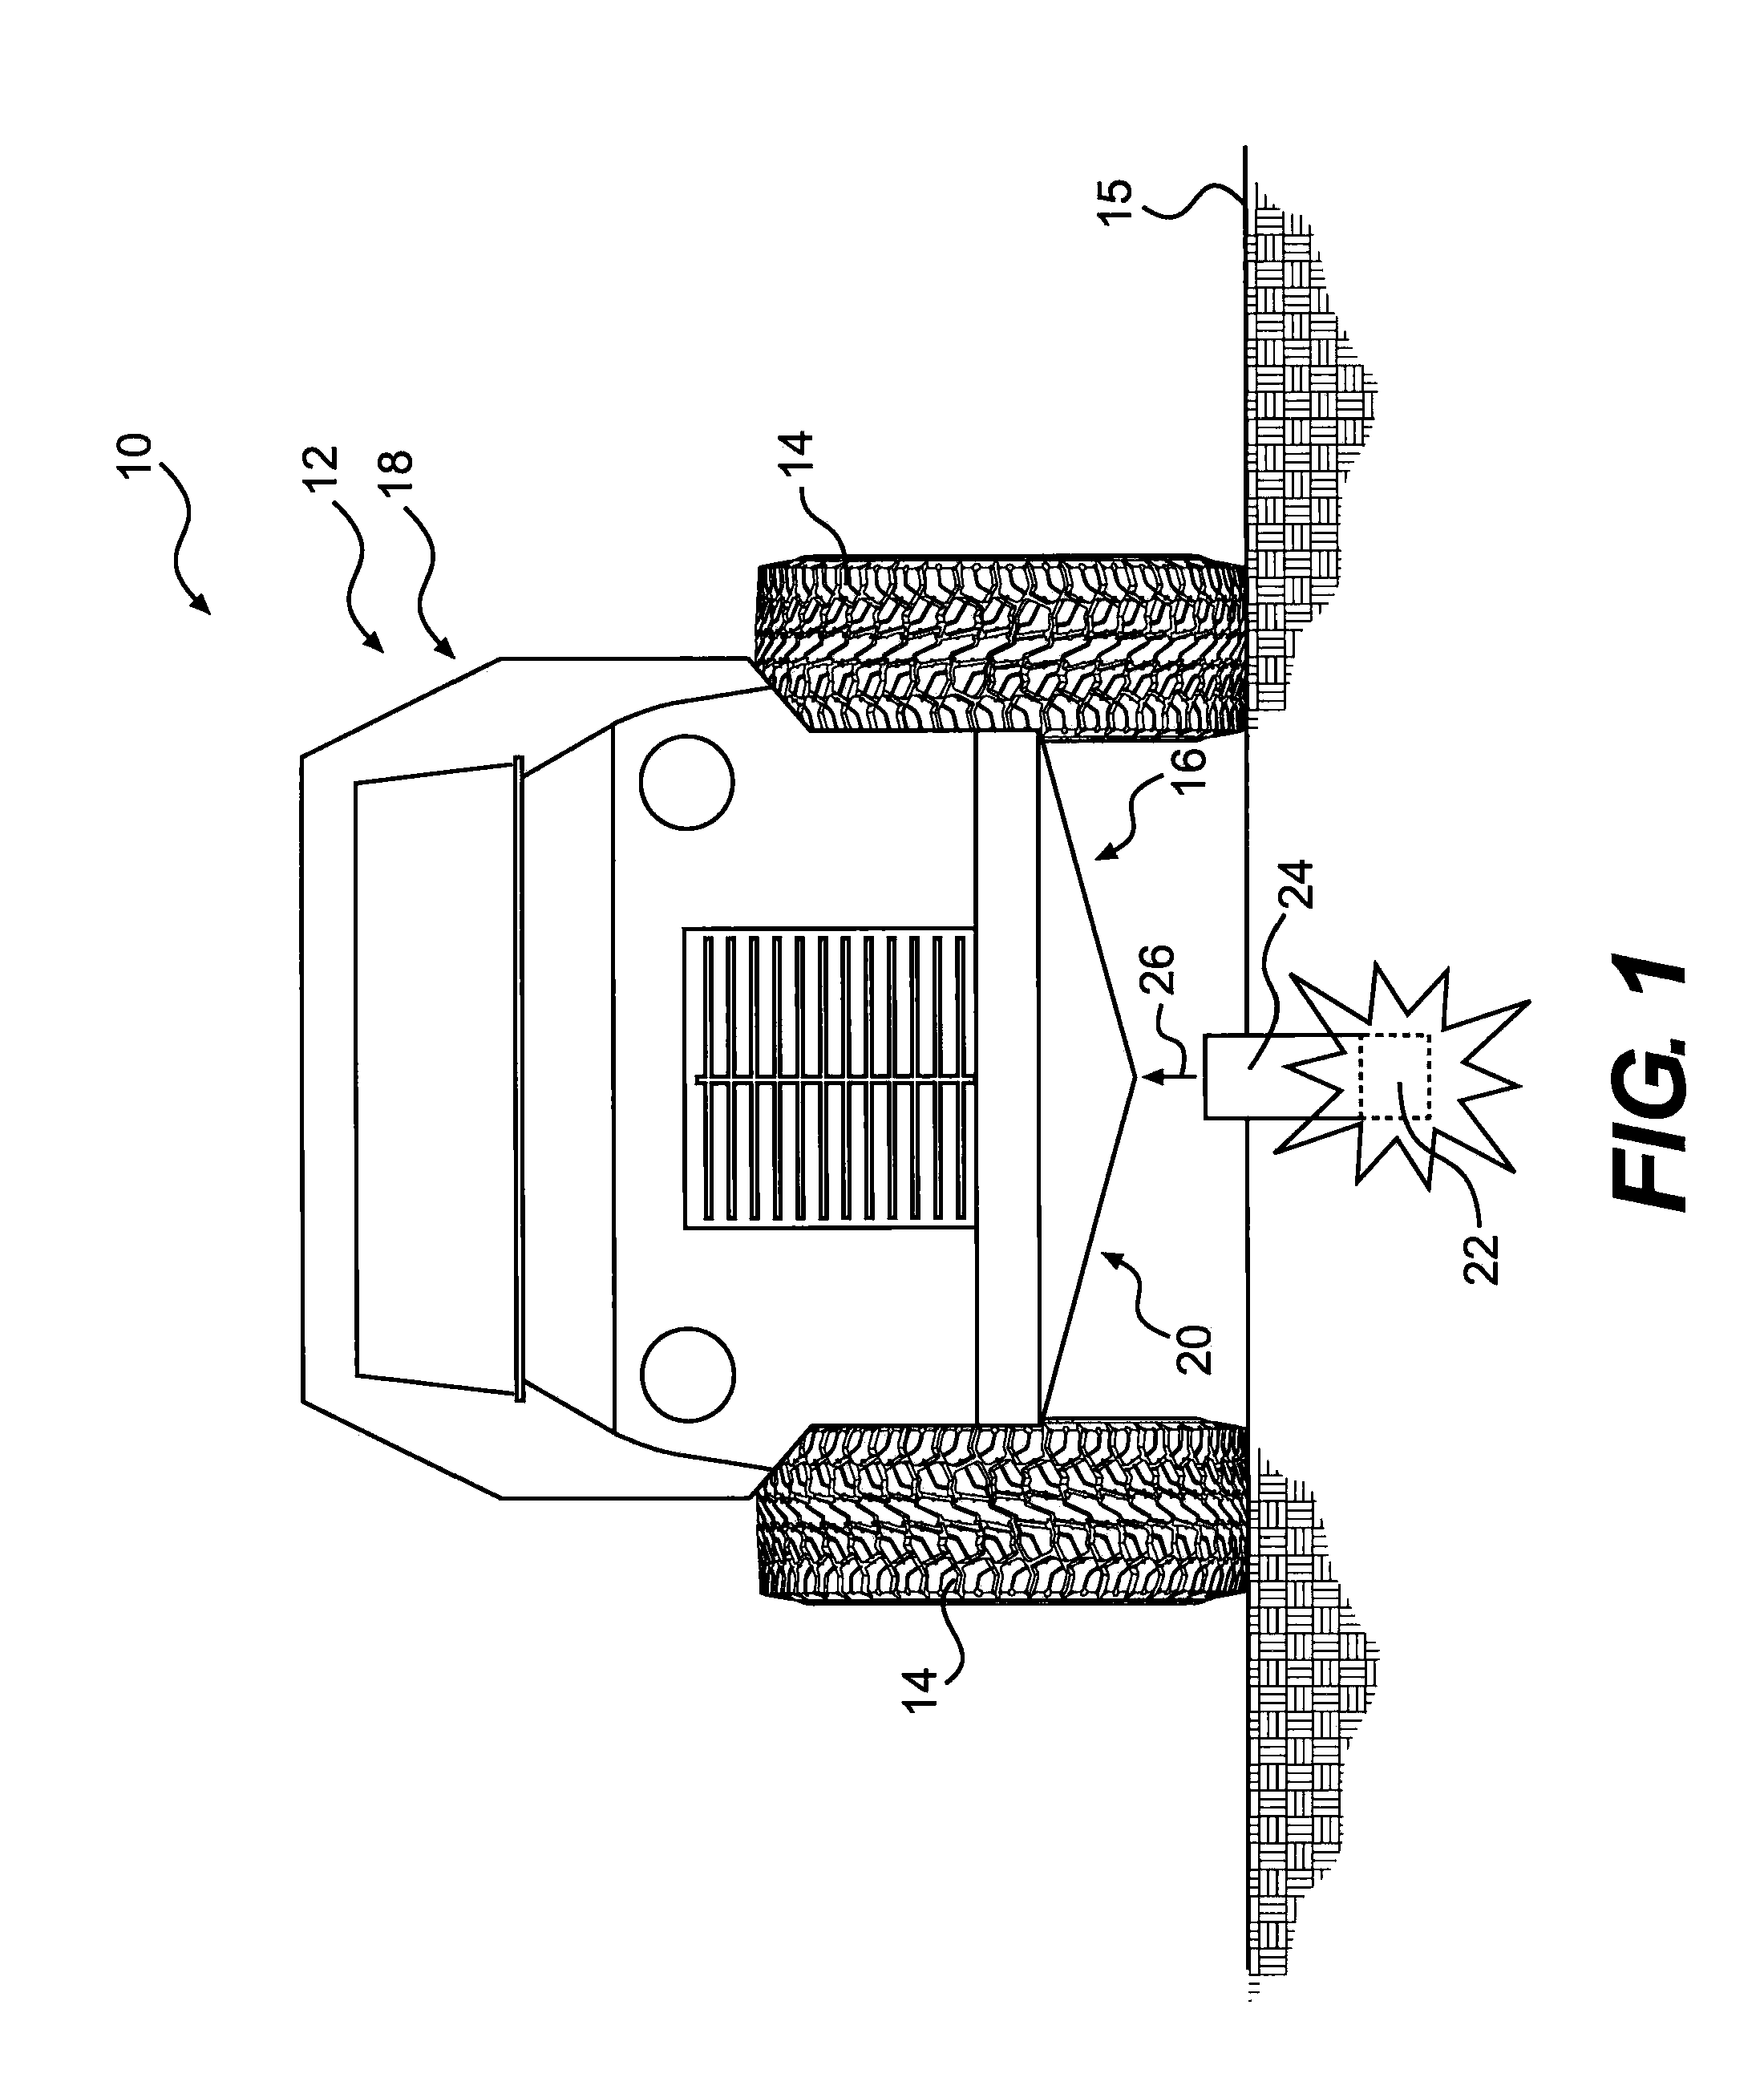 System for protecting a vehicle from a mine